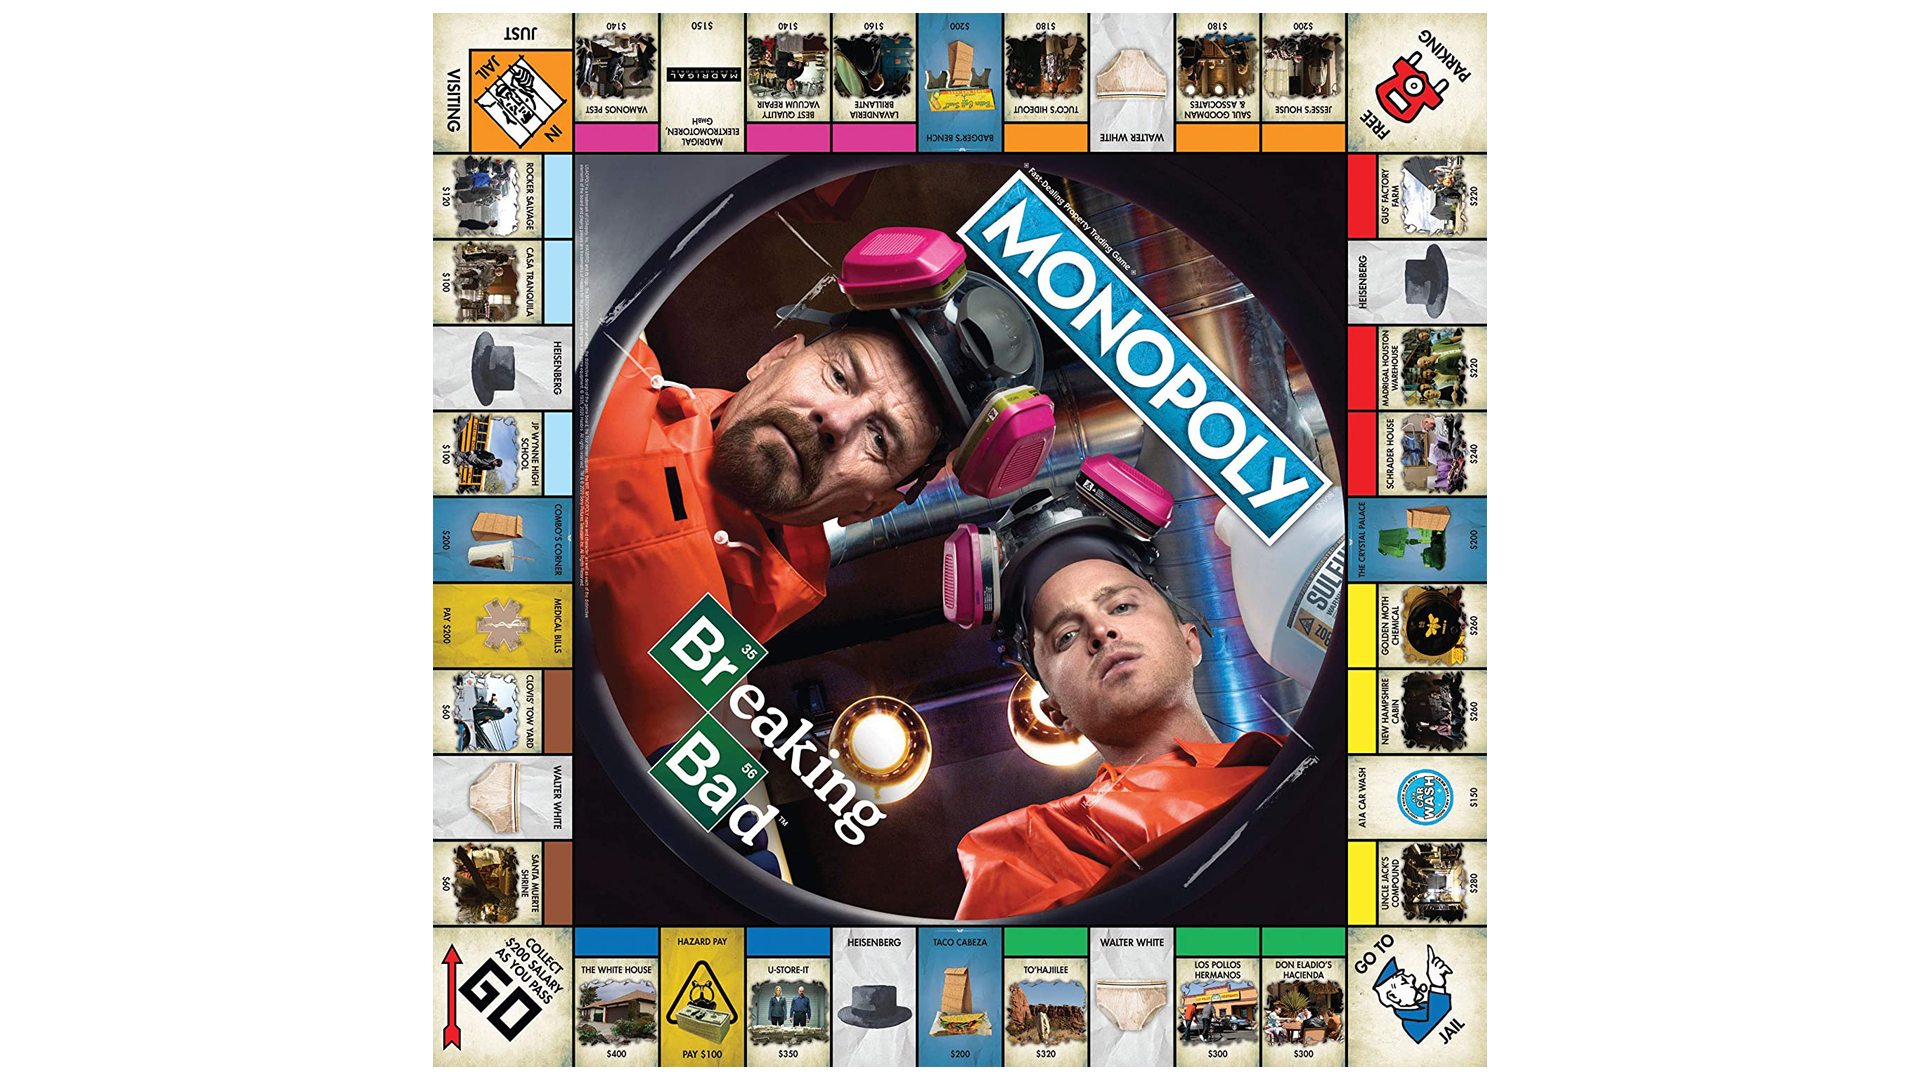 Monopoly: Breaking Bad Edition game board.